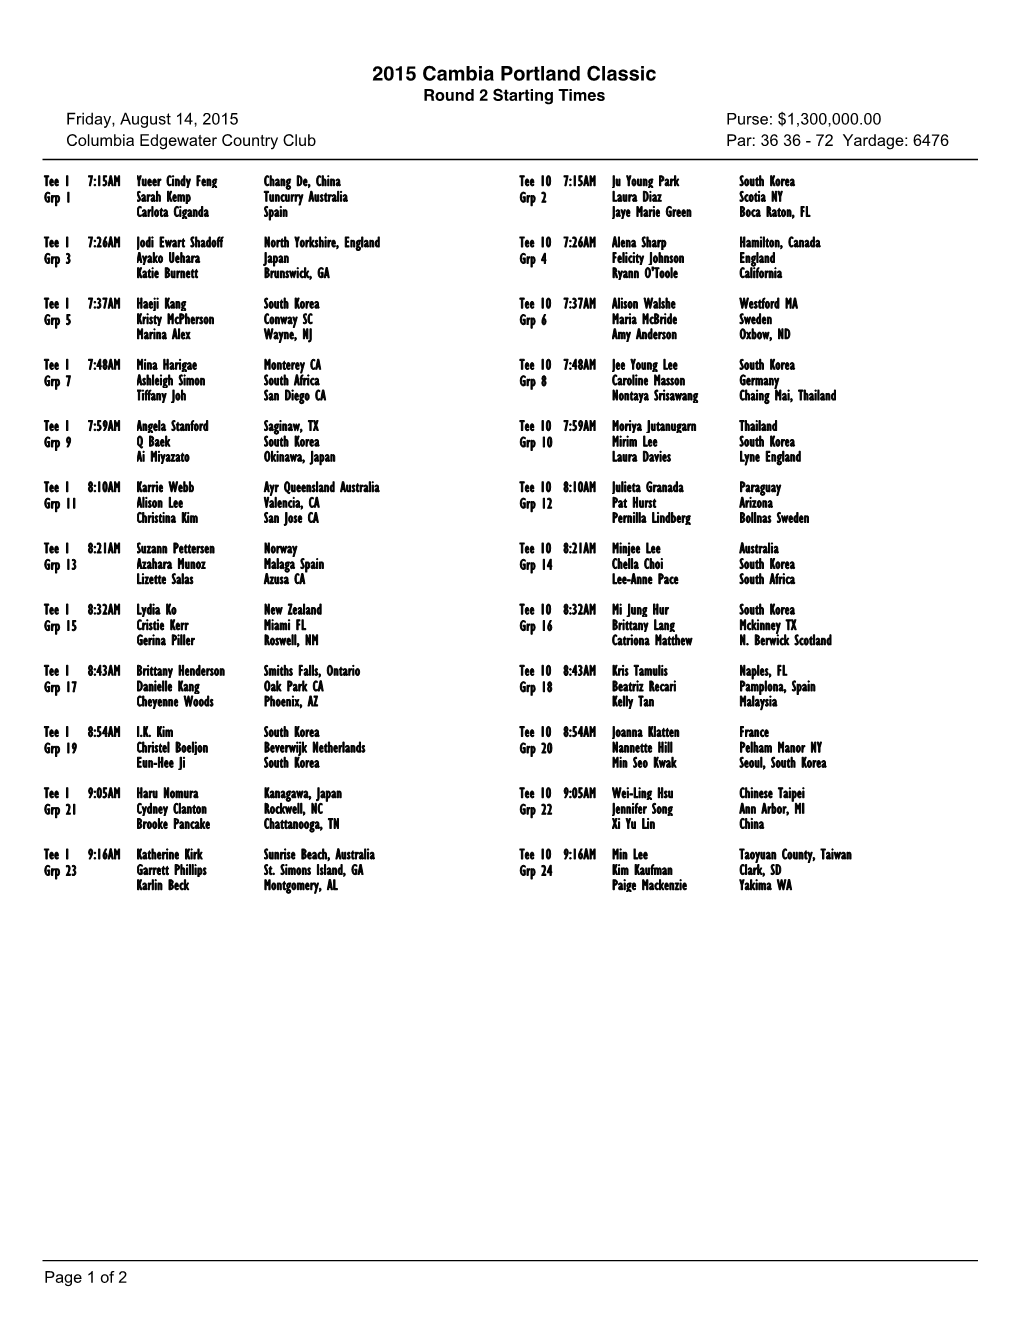 Second Round Tee Times